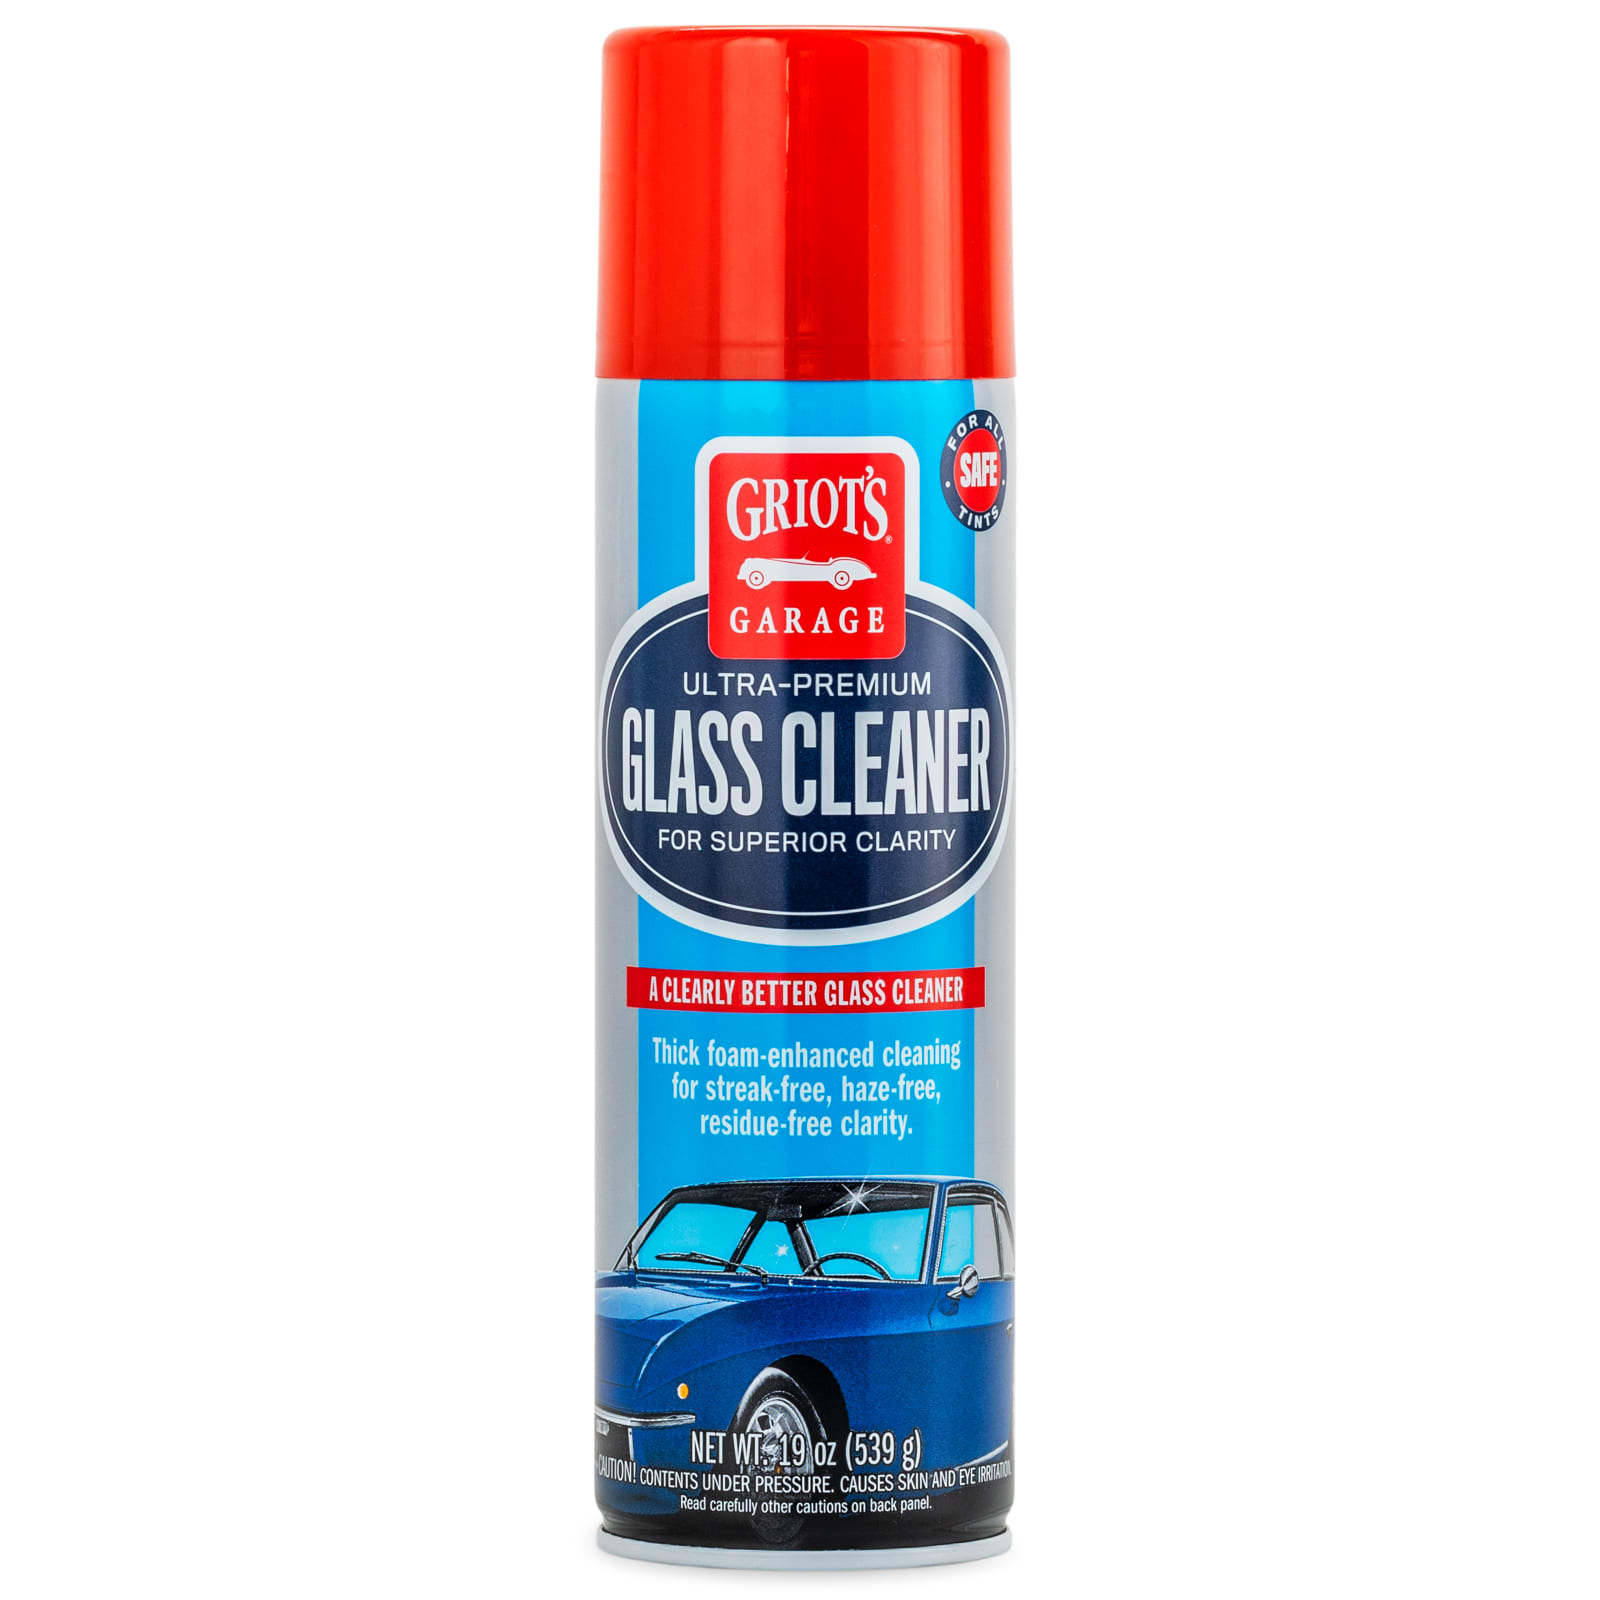 SAPI'S Auto Glass Cleaner Spray Auto Glass Cleaner for All Type of